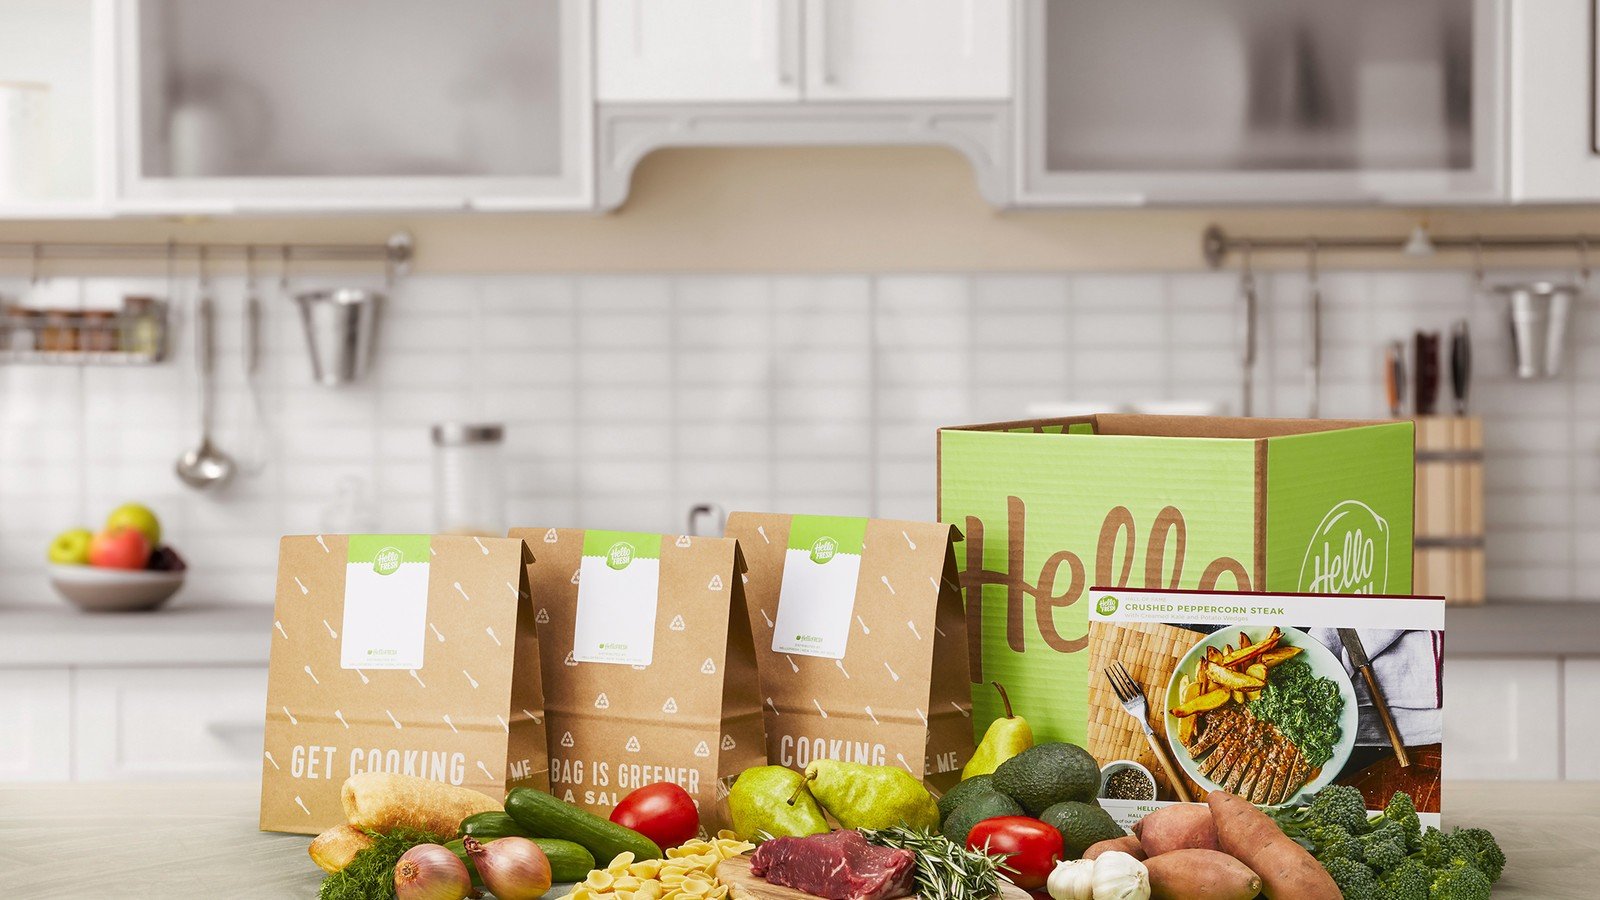 Does Hello Fresh offer gluten free meal kits?